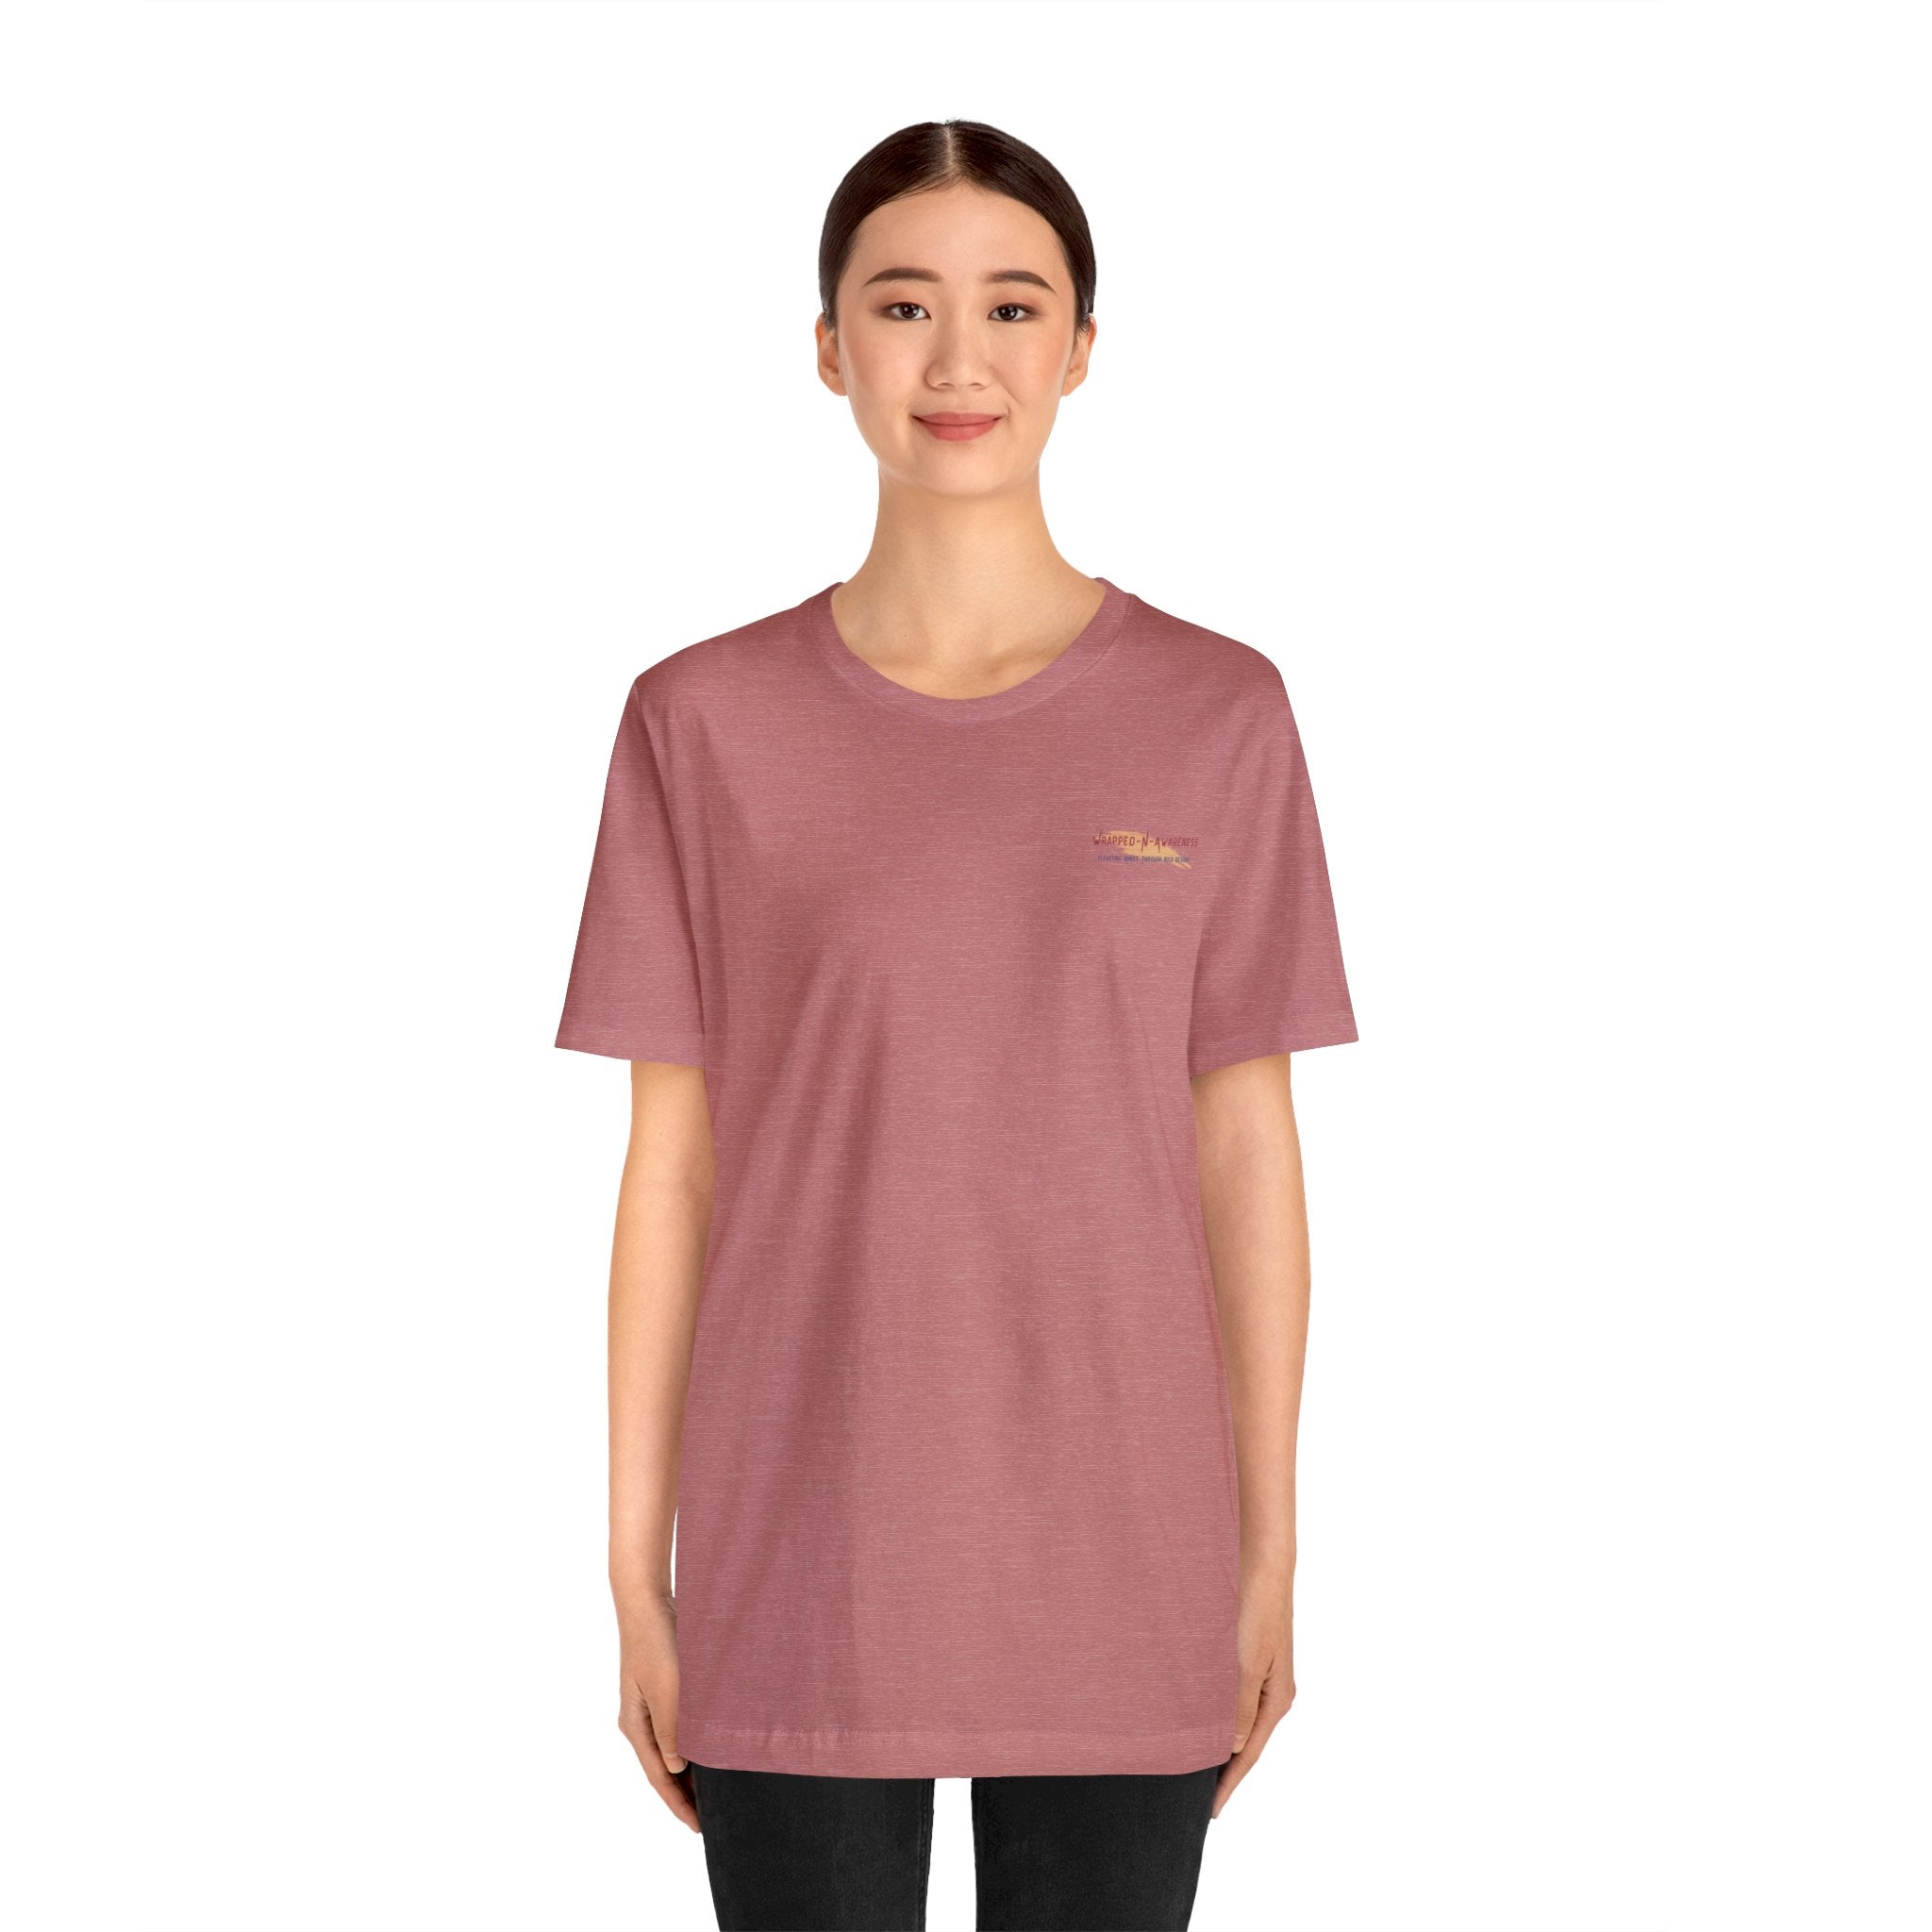 Mindfulness Heals Wounds Tee - Bella+Canvas 3001 Turquoise Airlume Cotton Bella+Canvas 3001 Crew Neckline Jersey Short Sleeve Lightweight Fabric Mental Health Support Retail Fit Tear-away Label Tee Unisex Tee T-Shirt 18326112188994761135_2048 Printify